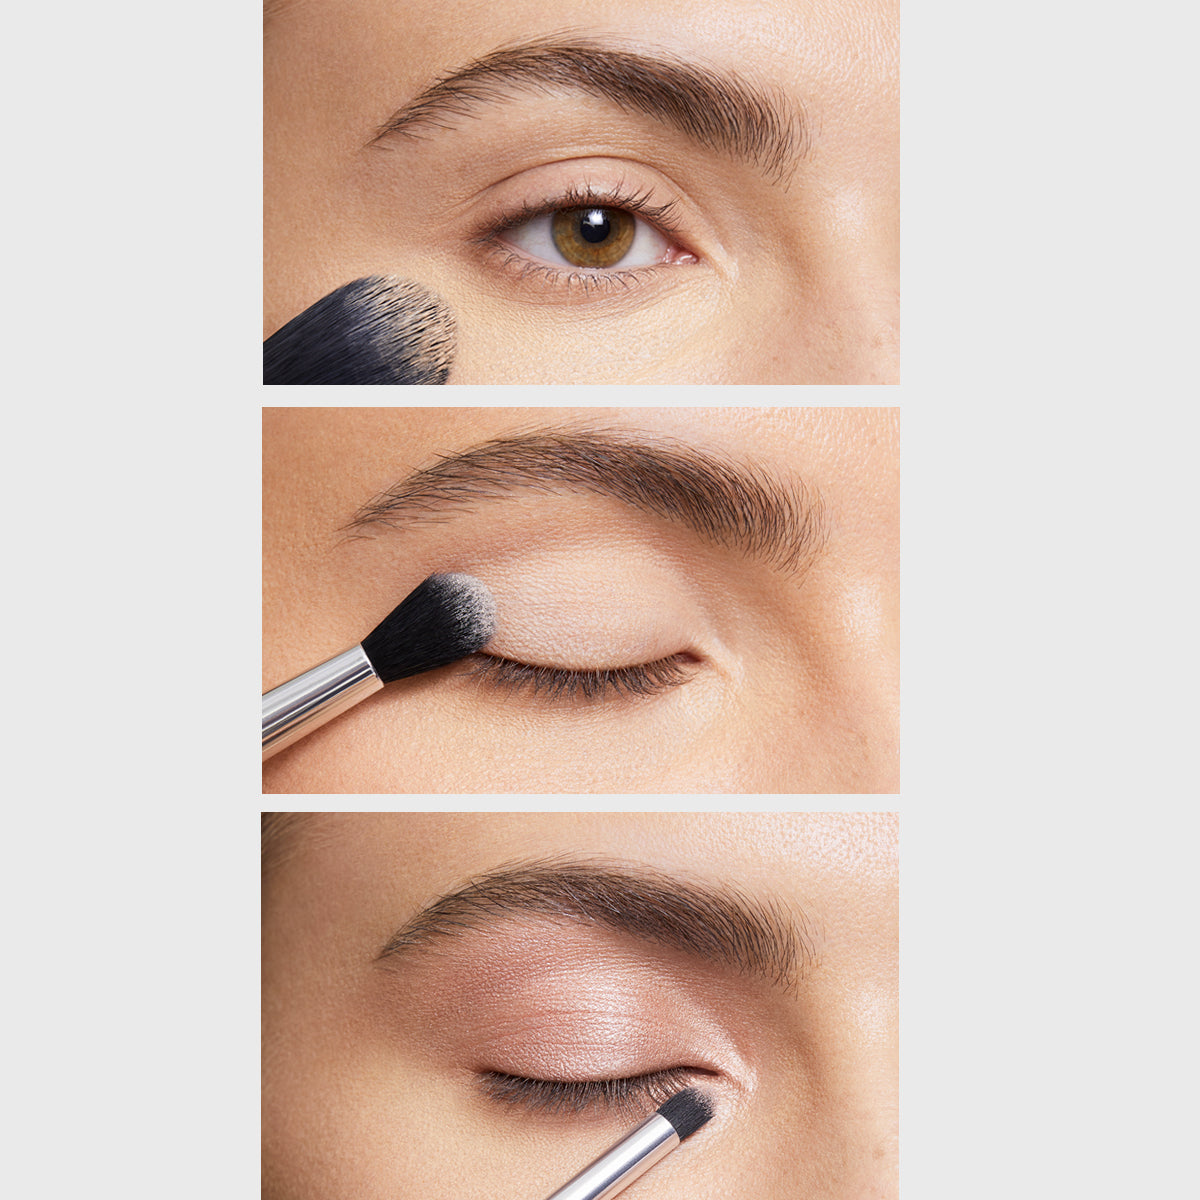 3 images showing model applying coconut concealer, then base eyeshadow, then a shimmer eye shadow to create a bright eye look